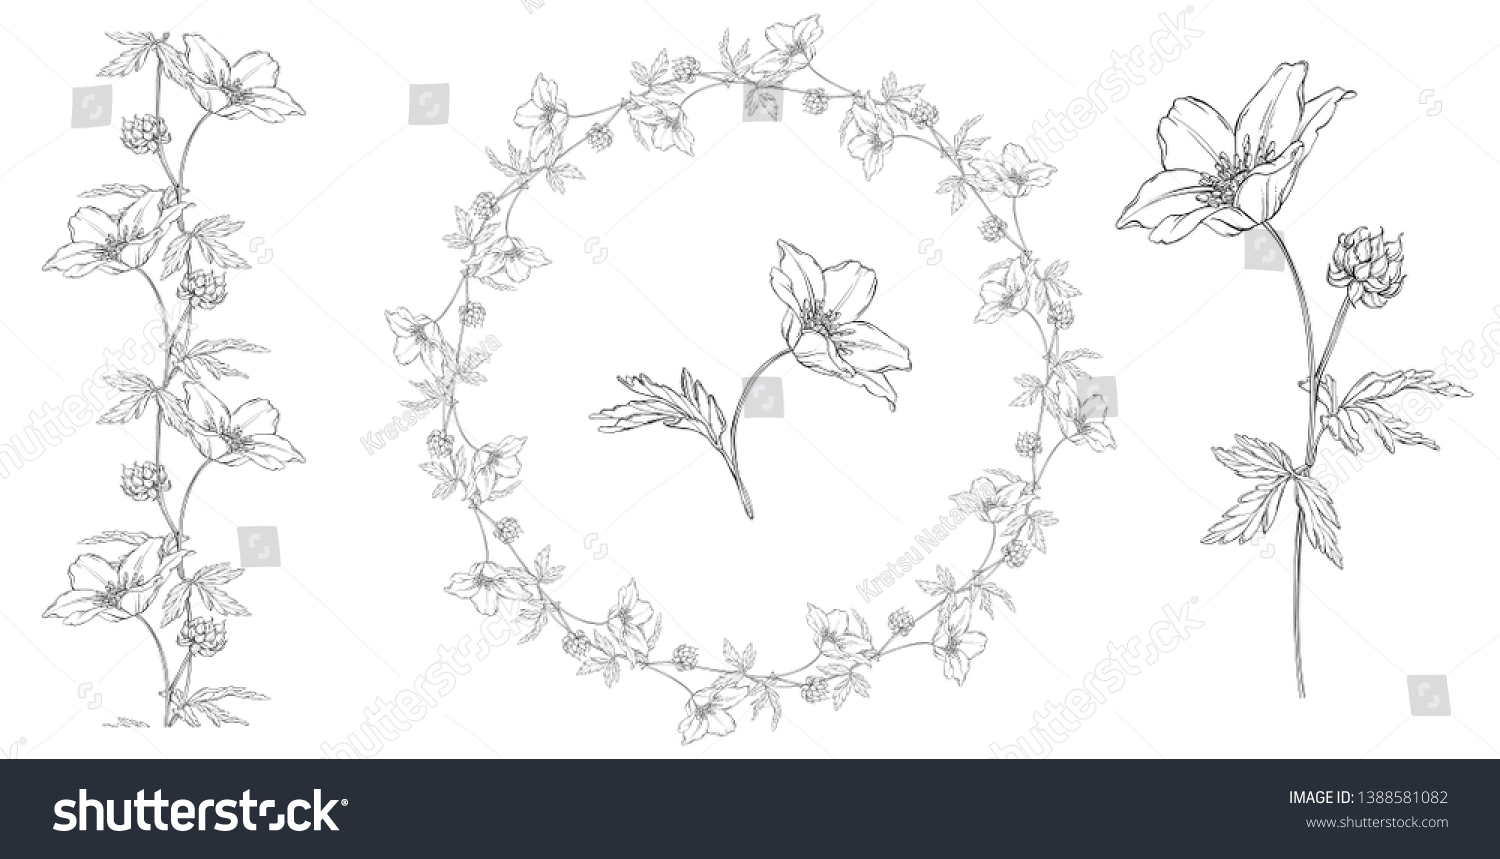 vector floral black and white composition set with anemone flowers #1388581082